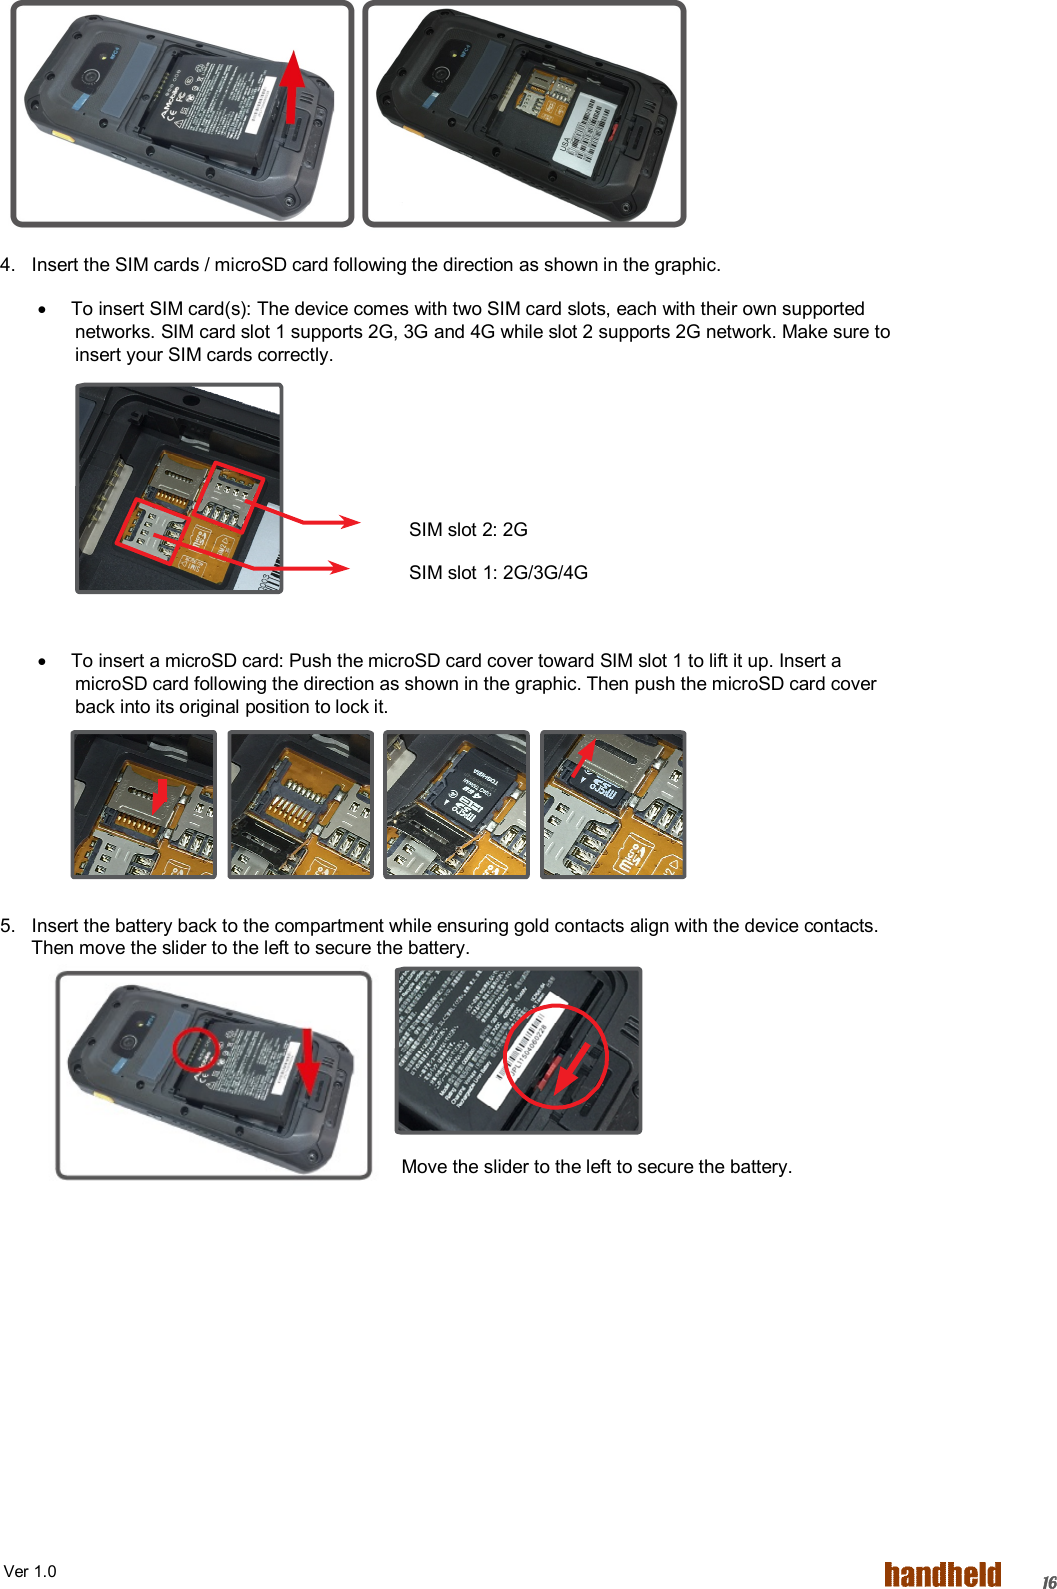  Ver 1.0   16          4.   Insert the SIM cards / microSD card following the direction as shown in the graphic.   To insert SIM card(s): The device comes with two SIM card slots, each with their own supported networks. SIM card slot 1 supports 2G, 3G and 4G while slot 2 supports 2G network. Make sure to insert your SIM cards correctly.      SIM slot 2: 2G   SIM slot 1: 2G/3G/4G    To insert a microSD card: Push the microSD card cover toward SIM slot 1 to lift it up. Insert a microSD card following the direction as shown in the graphic. Then push the microSD card cover back into its original position to lock it.     5.   Insert the battery back to the compartment while ensuring gold contacts align with the device contacts.         Then move the slider to the left to secure the battery.     Move the slider to the left to secure the battery. 